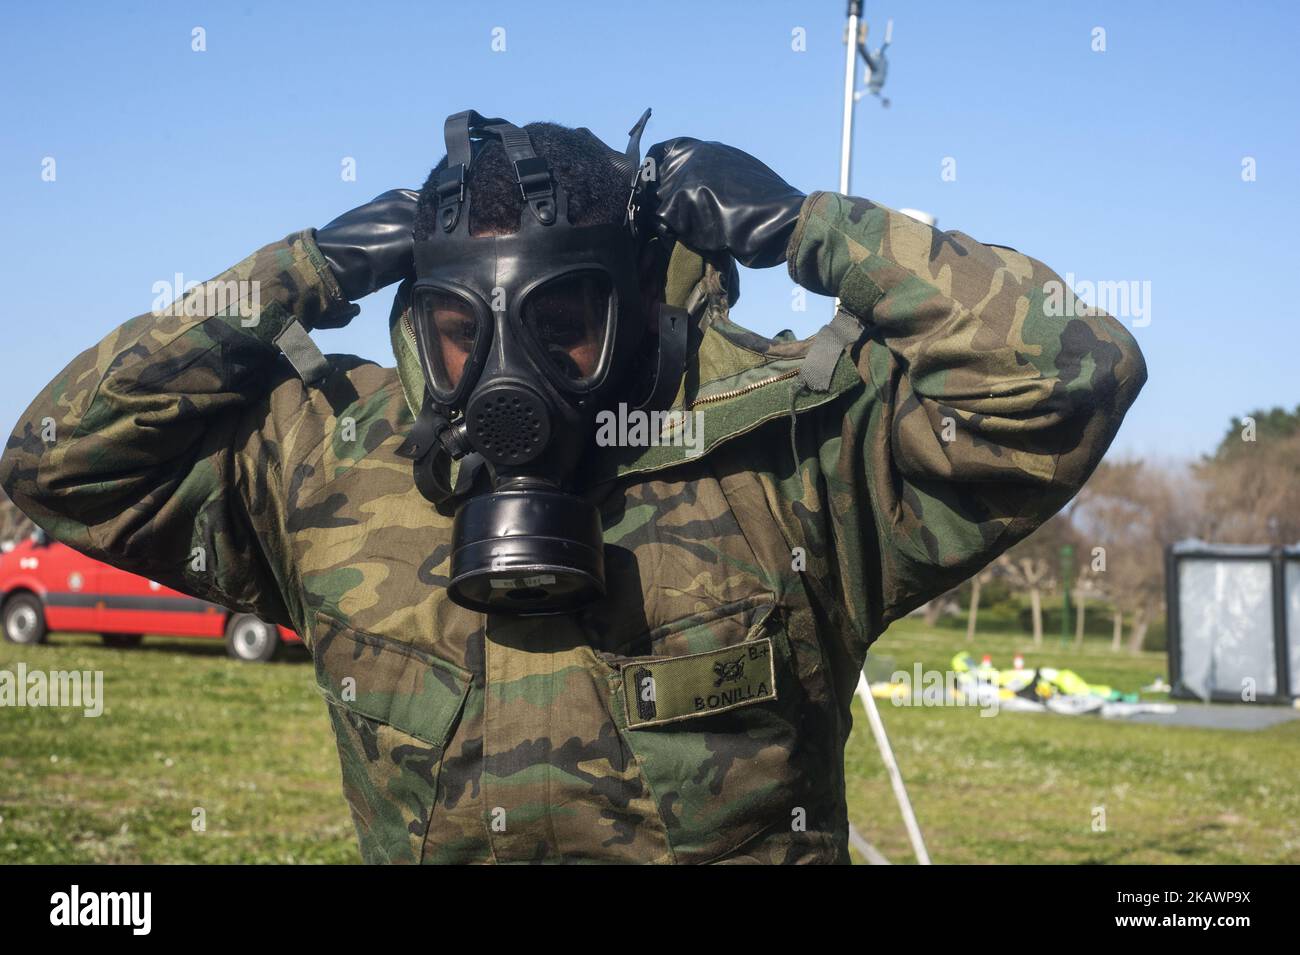 A soldier of the Spanish army puts on his antigas mask to participate in the simulation of a sarin gas attack in Santander, Spain on February 23, 2018. (Photo by Joaquin Gomez Sastre/NurPhoto) Stock Photo